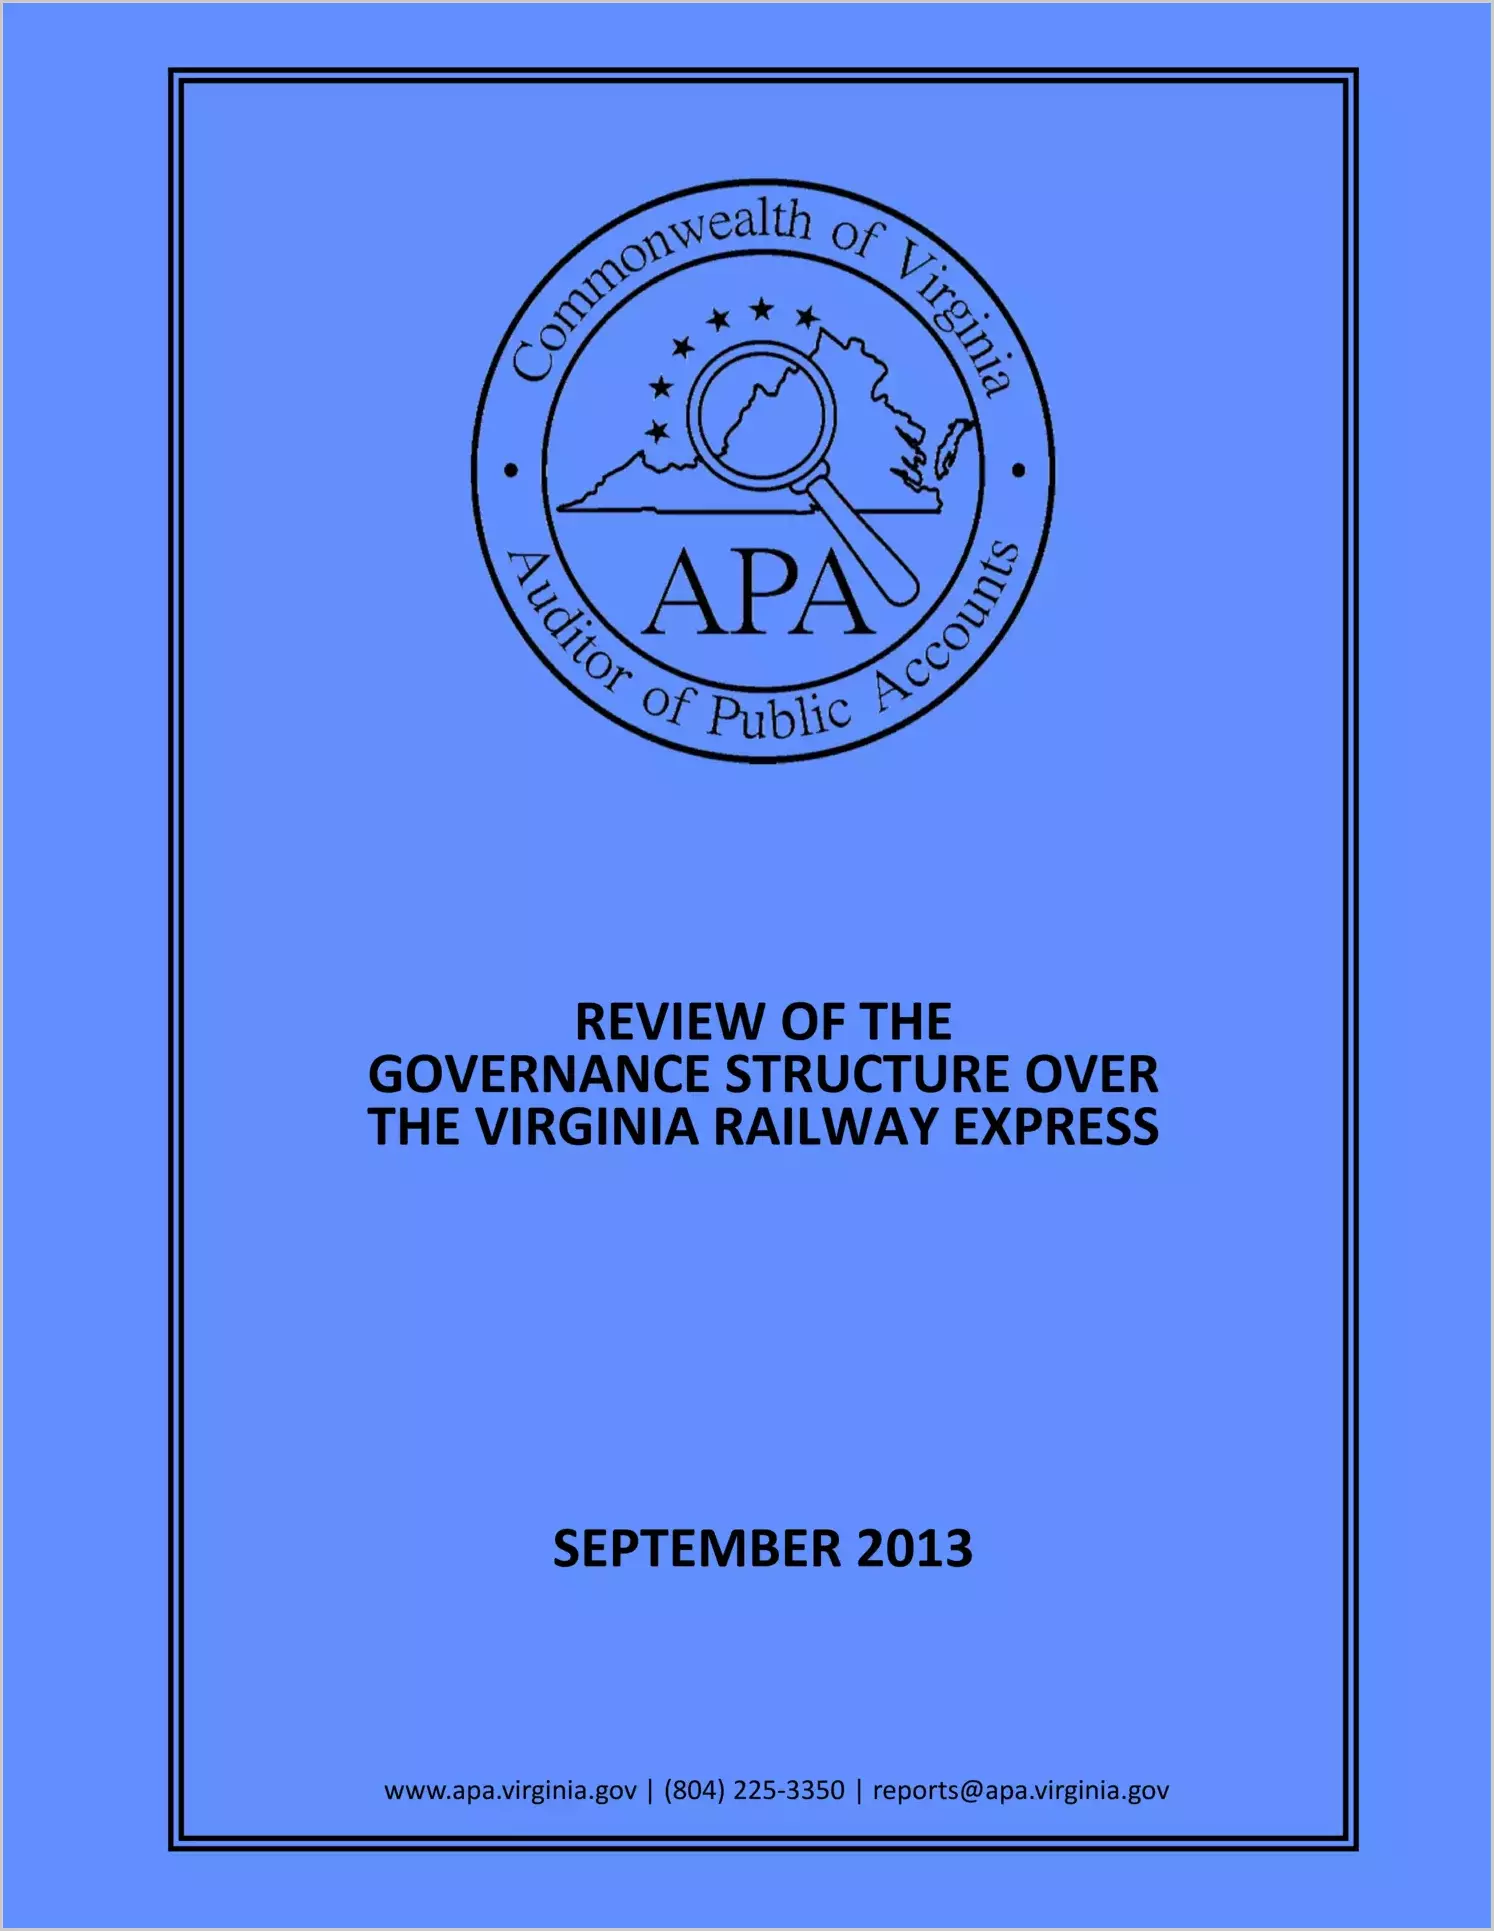 Review of the Governance Structure Over the Virginia Railway Express - September 2013